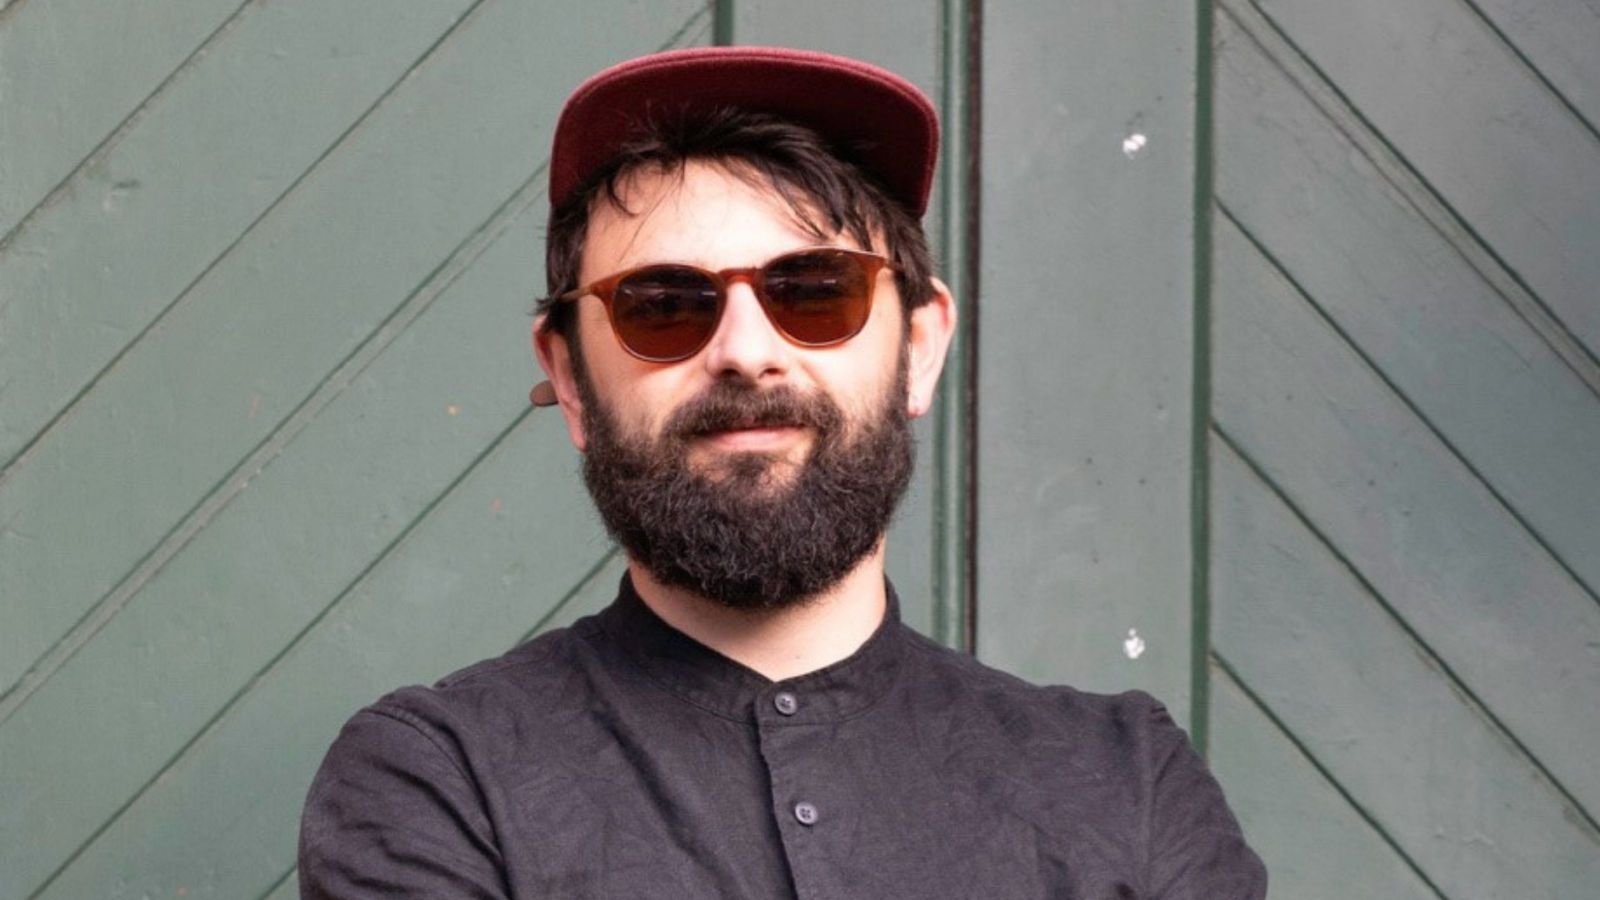 man with cap, beard, and sunglasses, wearing black button up shirt